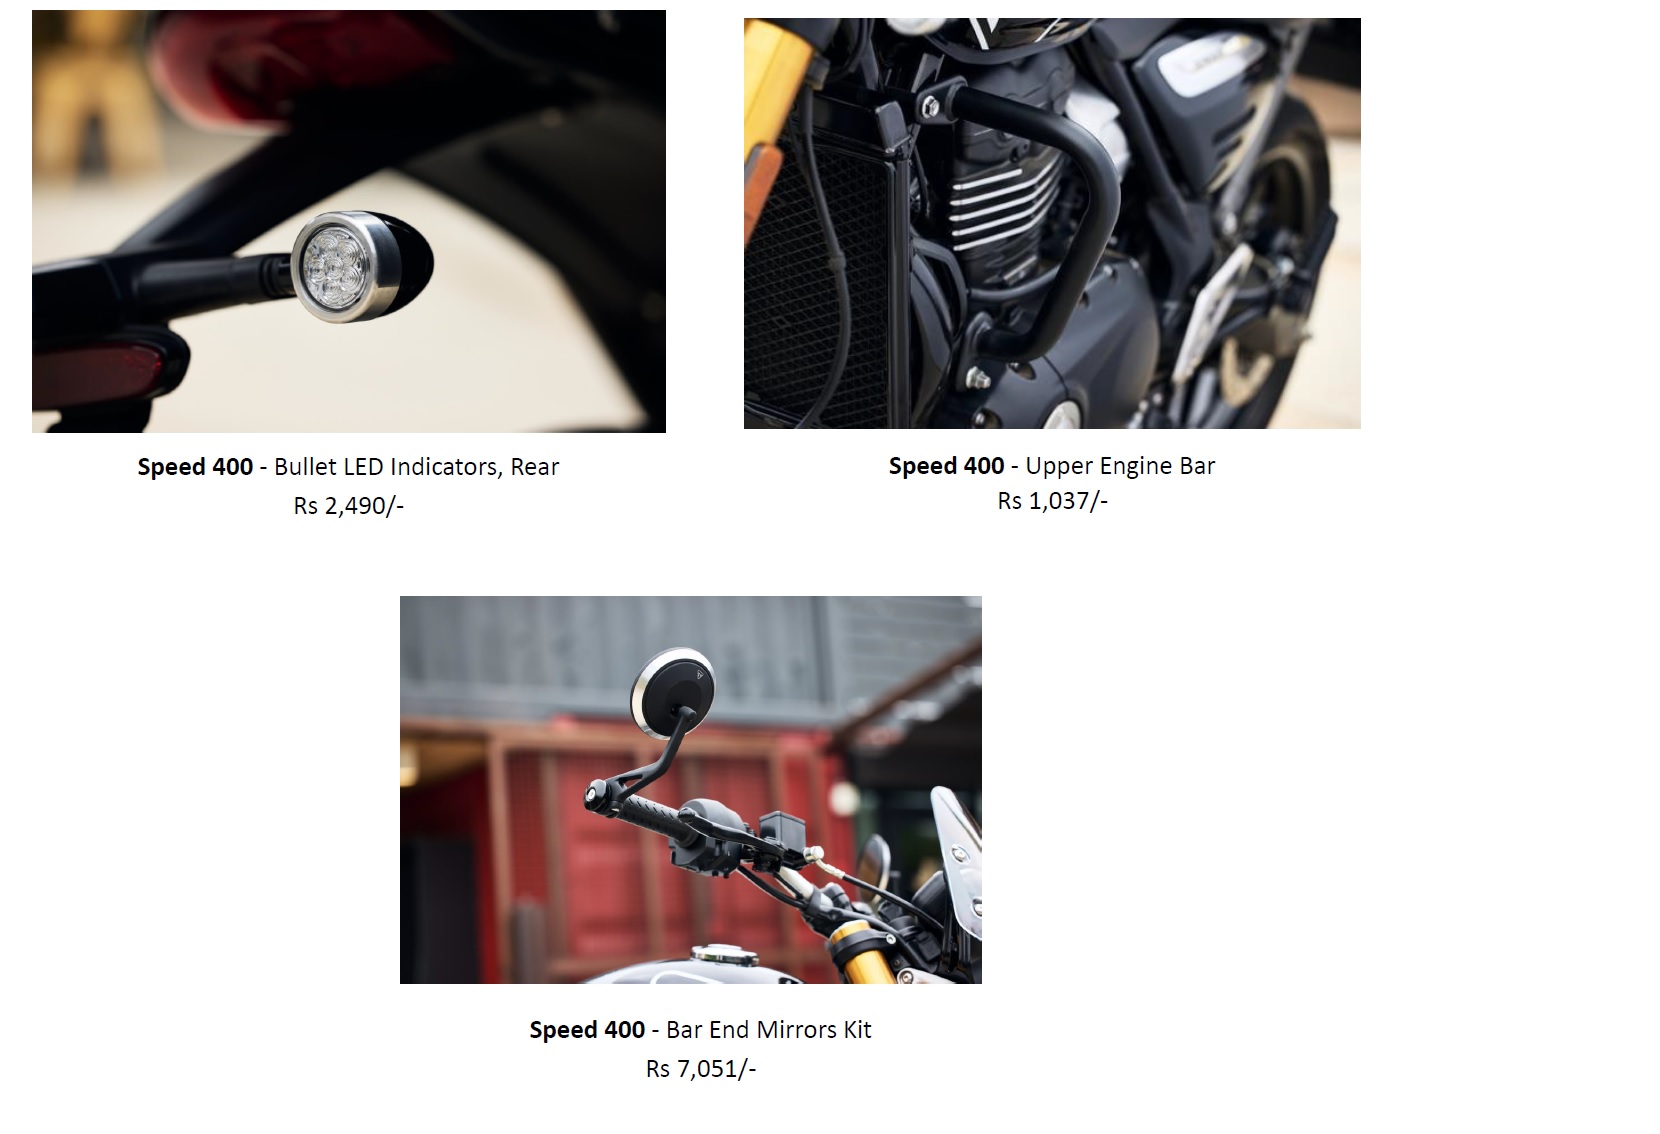 All New Triumph Speed 400 Accessories Are Also Tempting!